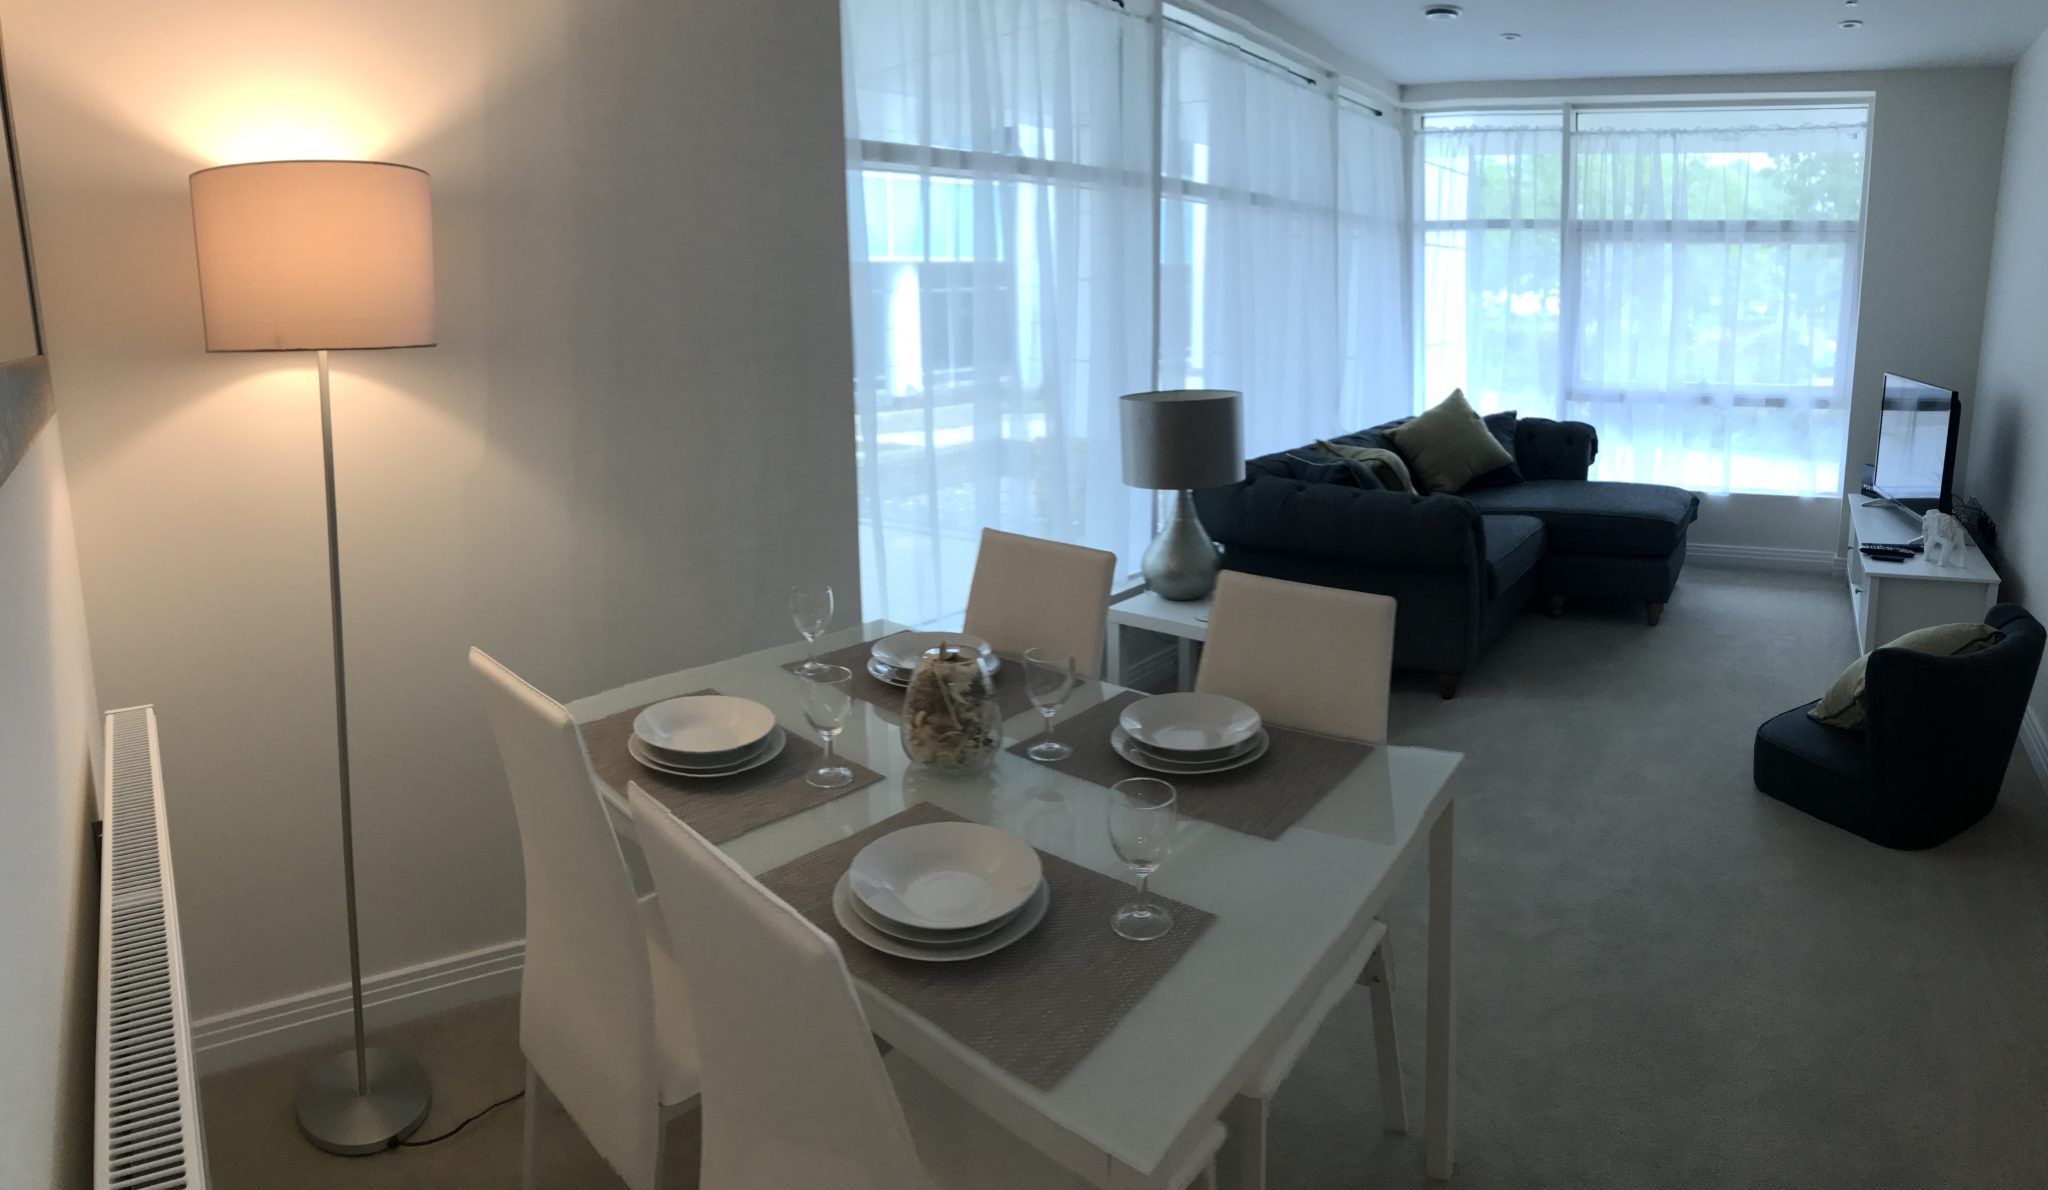 Welwyn-Garden-City-Serviced-Apartments-Times-Square-|-Lift-Access-|-Free-Wifi-|-Parking-|-Call-us-today-for-the-best-rates-on-0208-6913920|-Urban-Stay